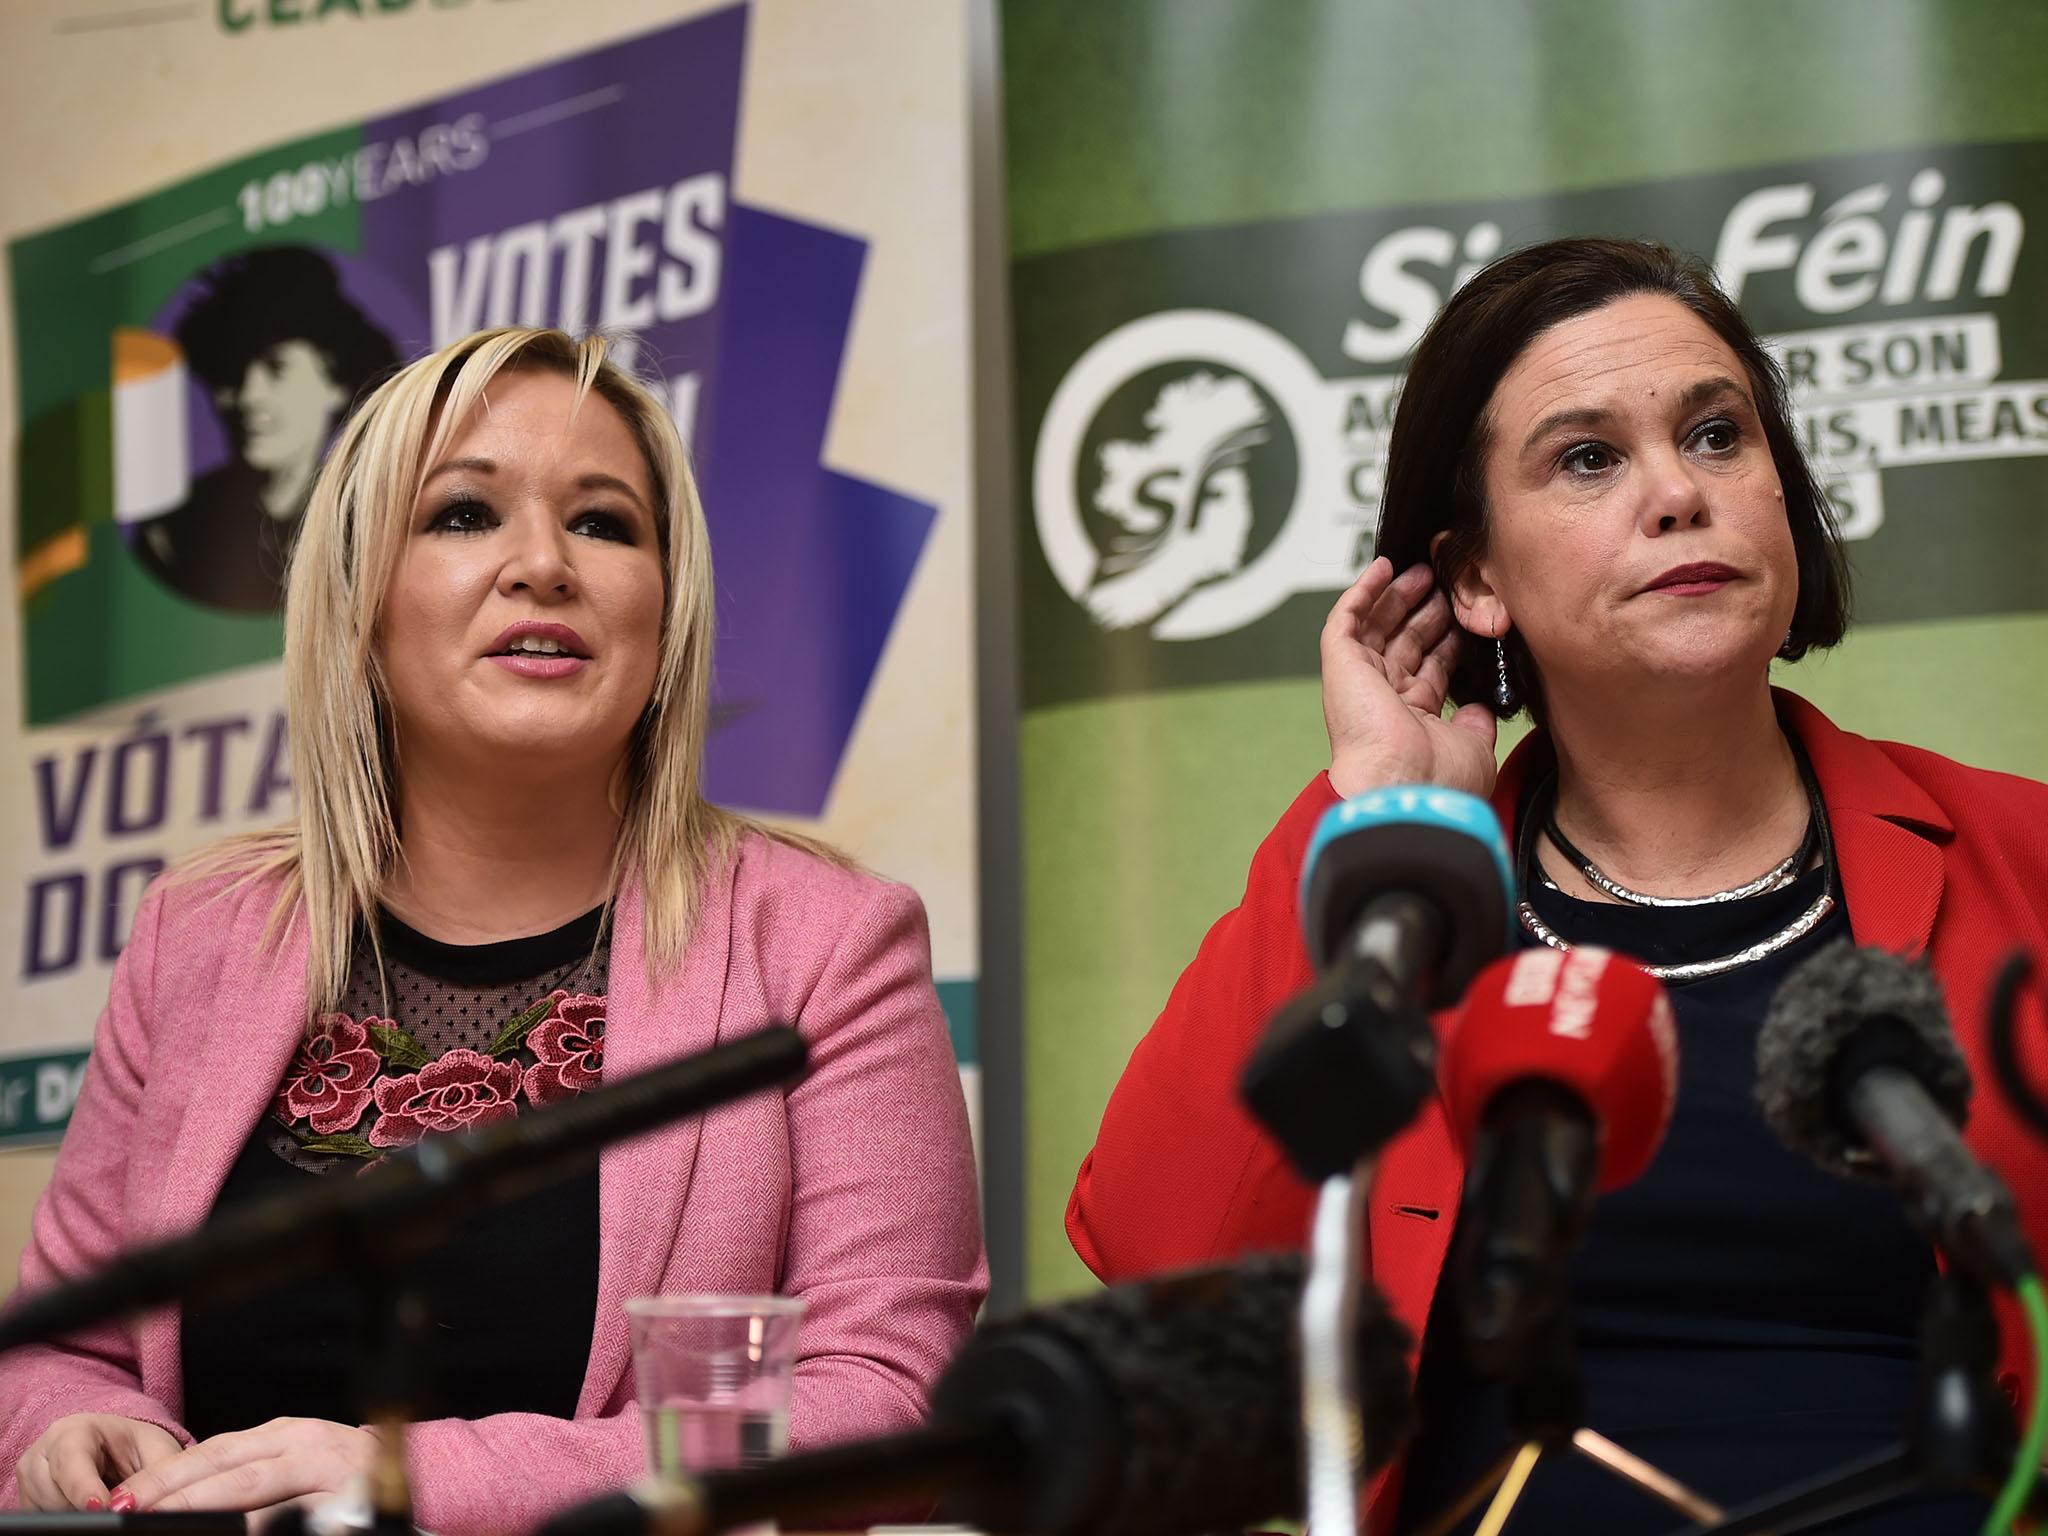 Sinn Fein leader Mary Lou McDonald, right, and her deputy, Michelle O’Neill, said the DUP was responsible for talks breaking down